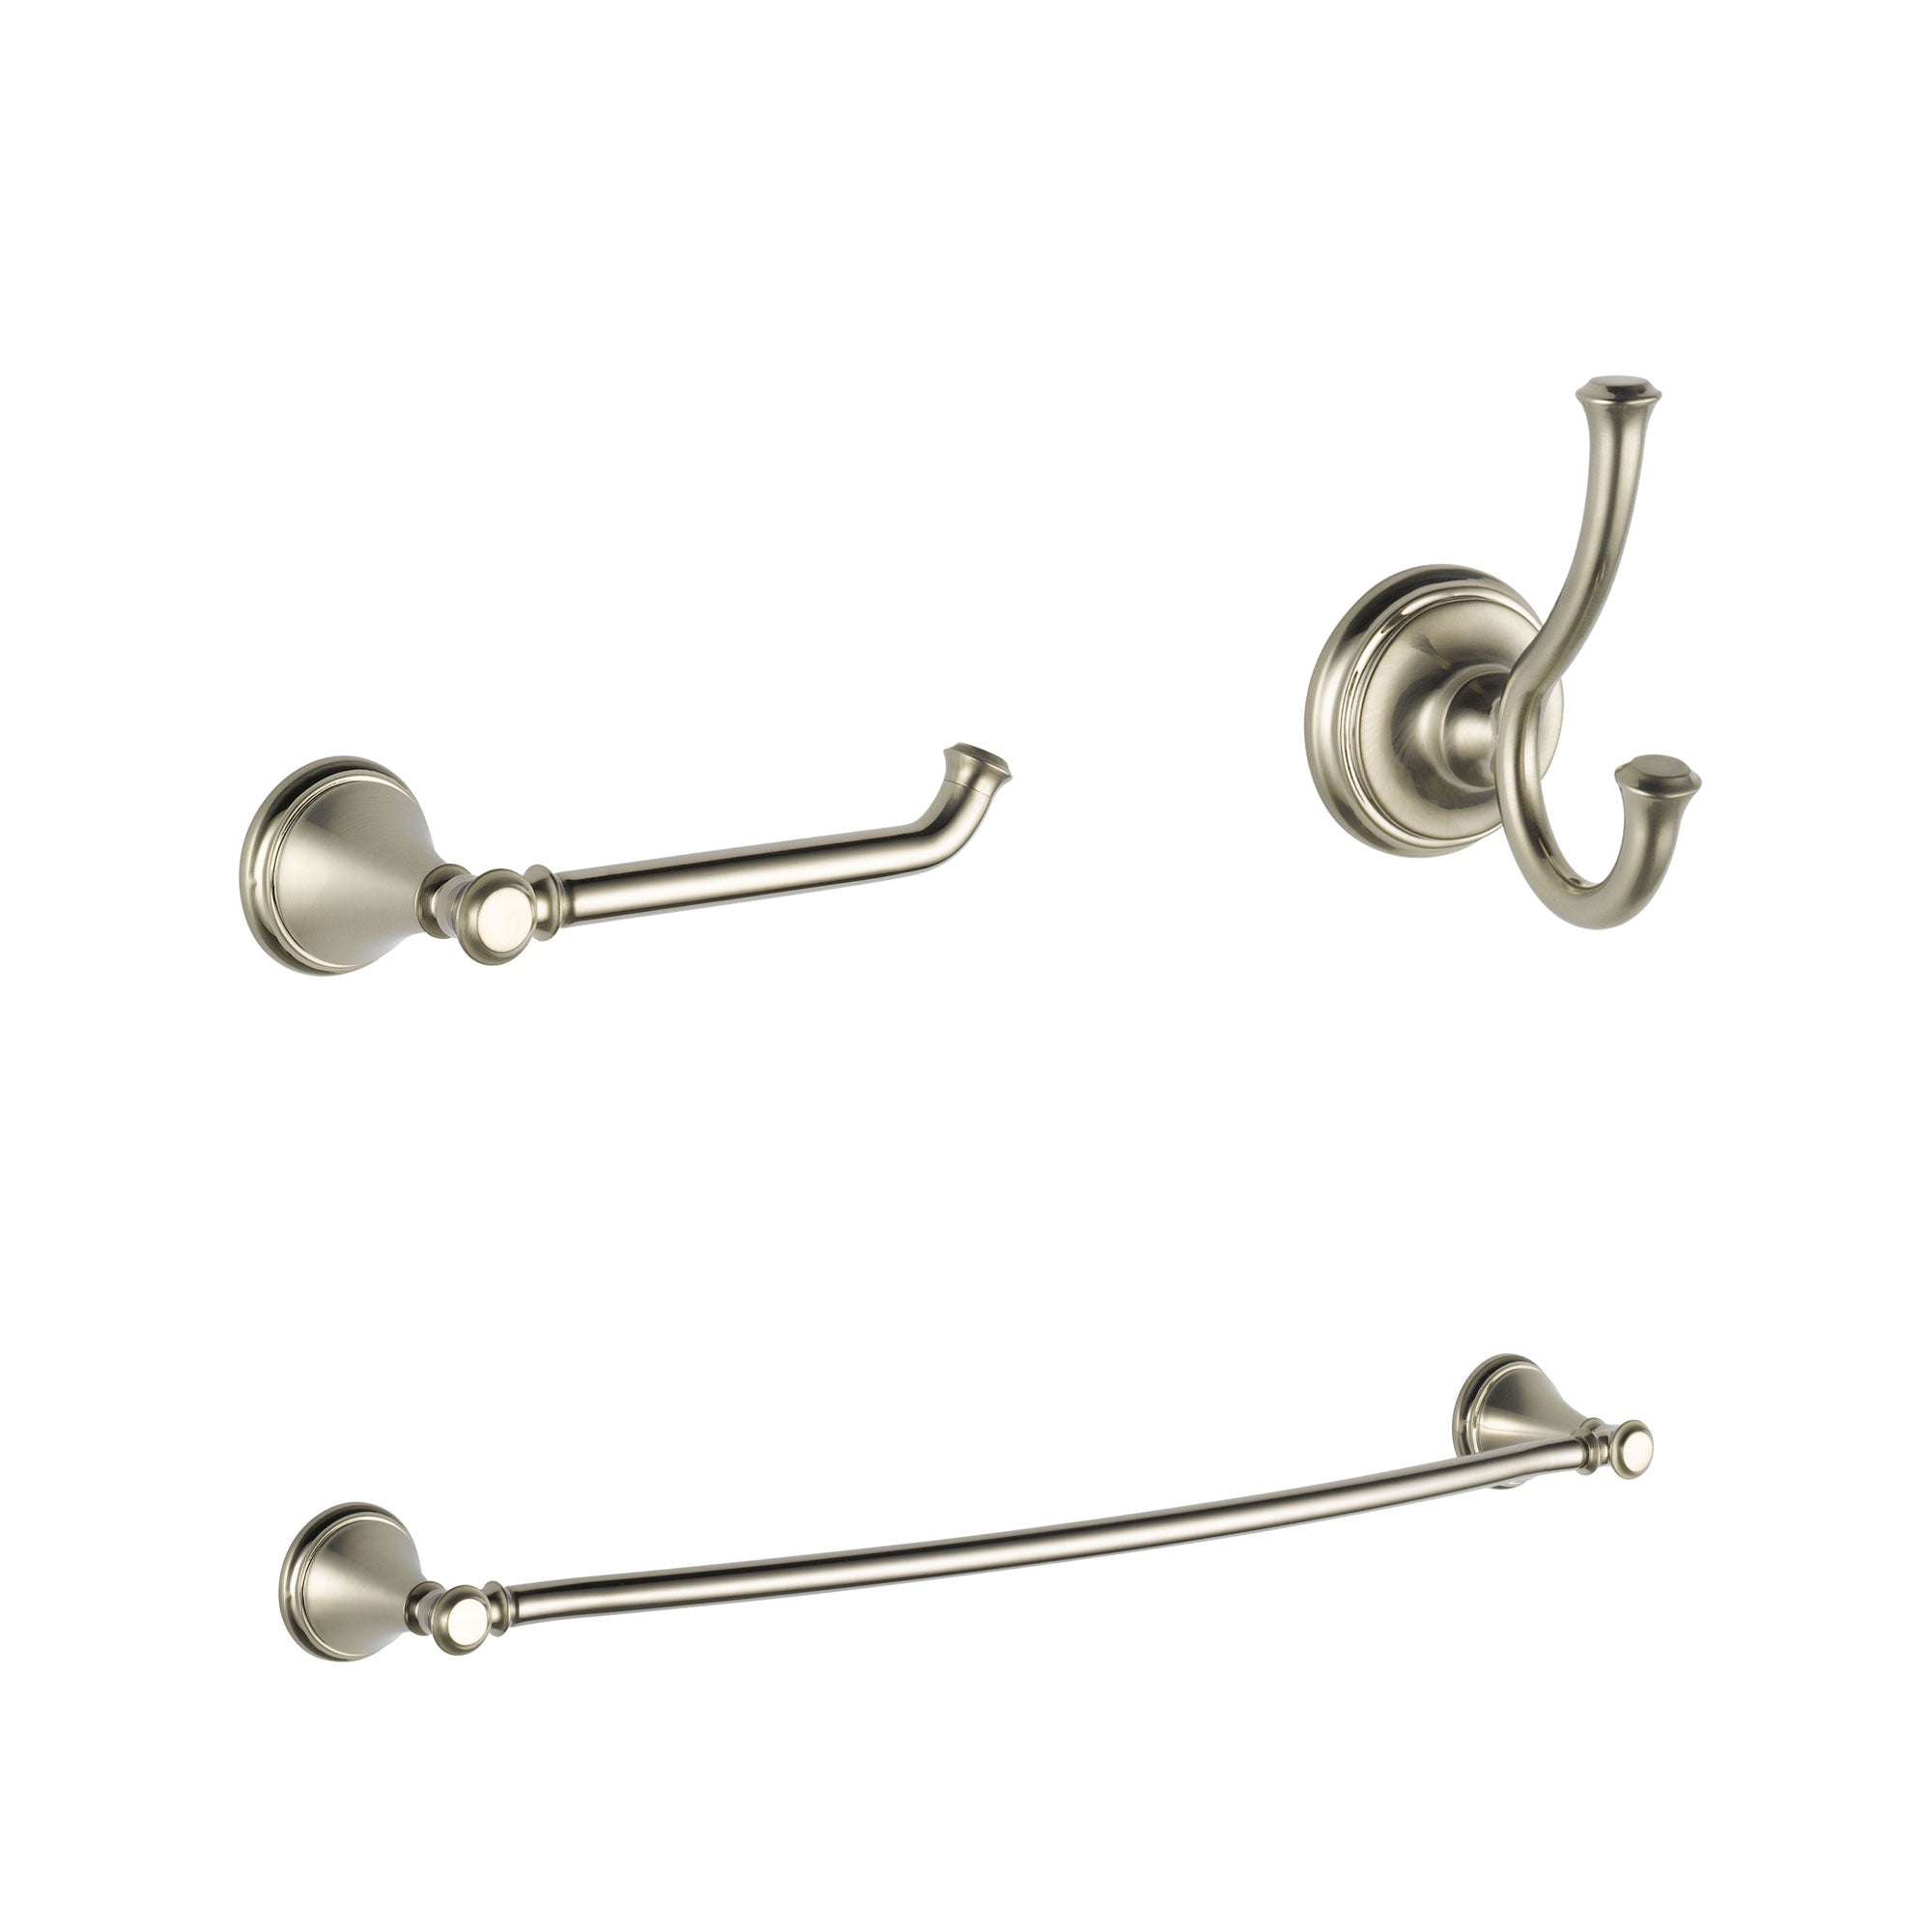 Delta Cassidy Stainless Steel Finish BASICS Bathroom Accessory Set Includes: 24" Towel Bar, Toilet Paper Holder, and Robe Hook D10019AP